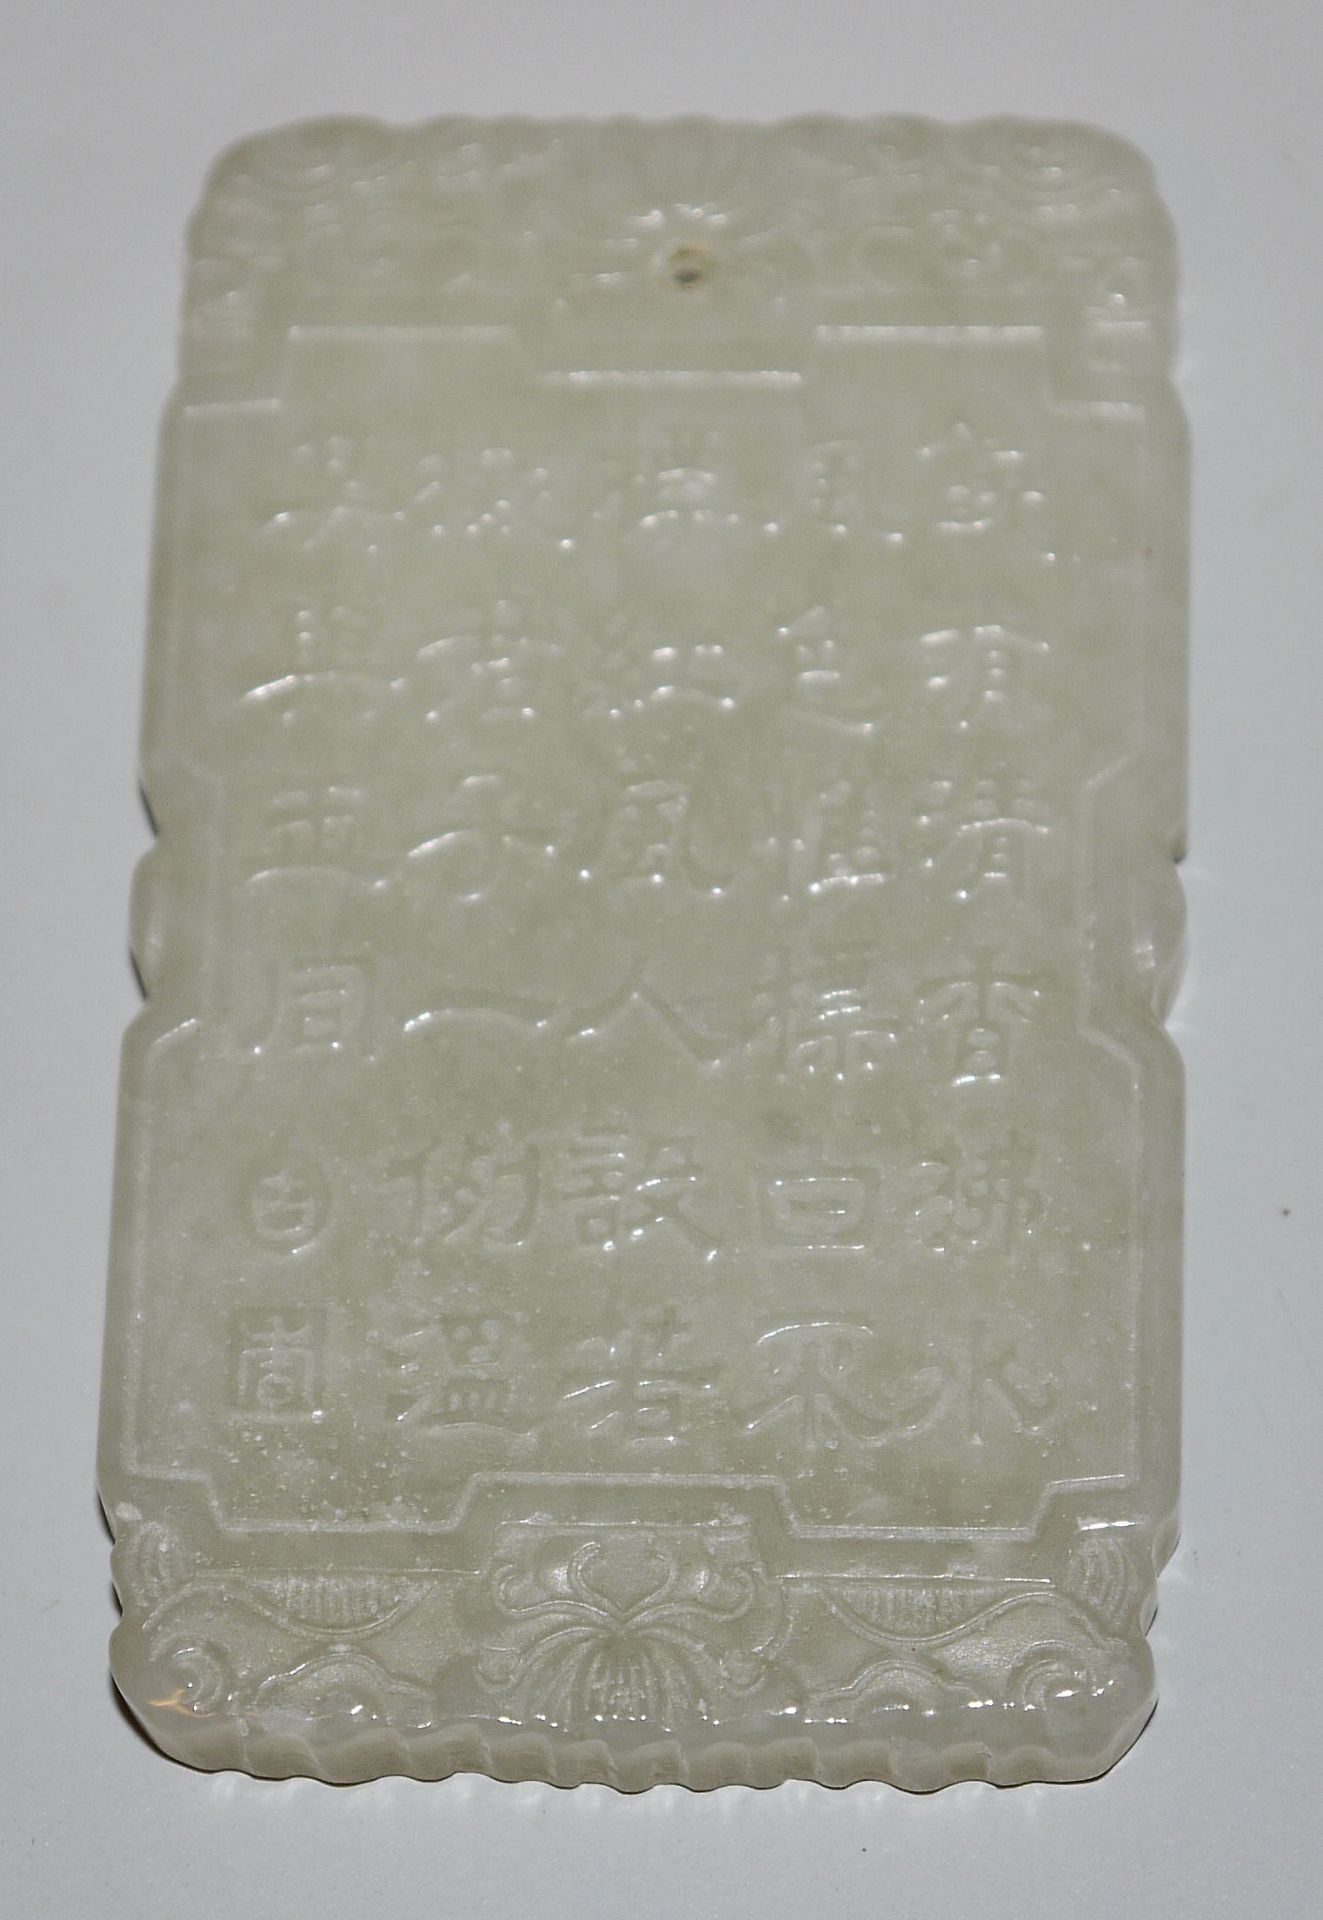 Hsuming, Chinese lucky amulet of fine jade - Image 2 of 2